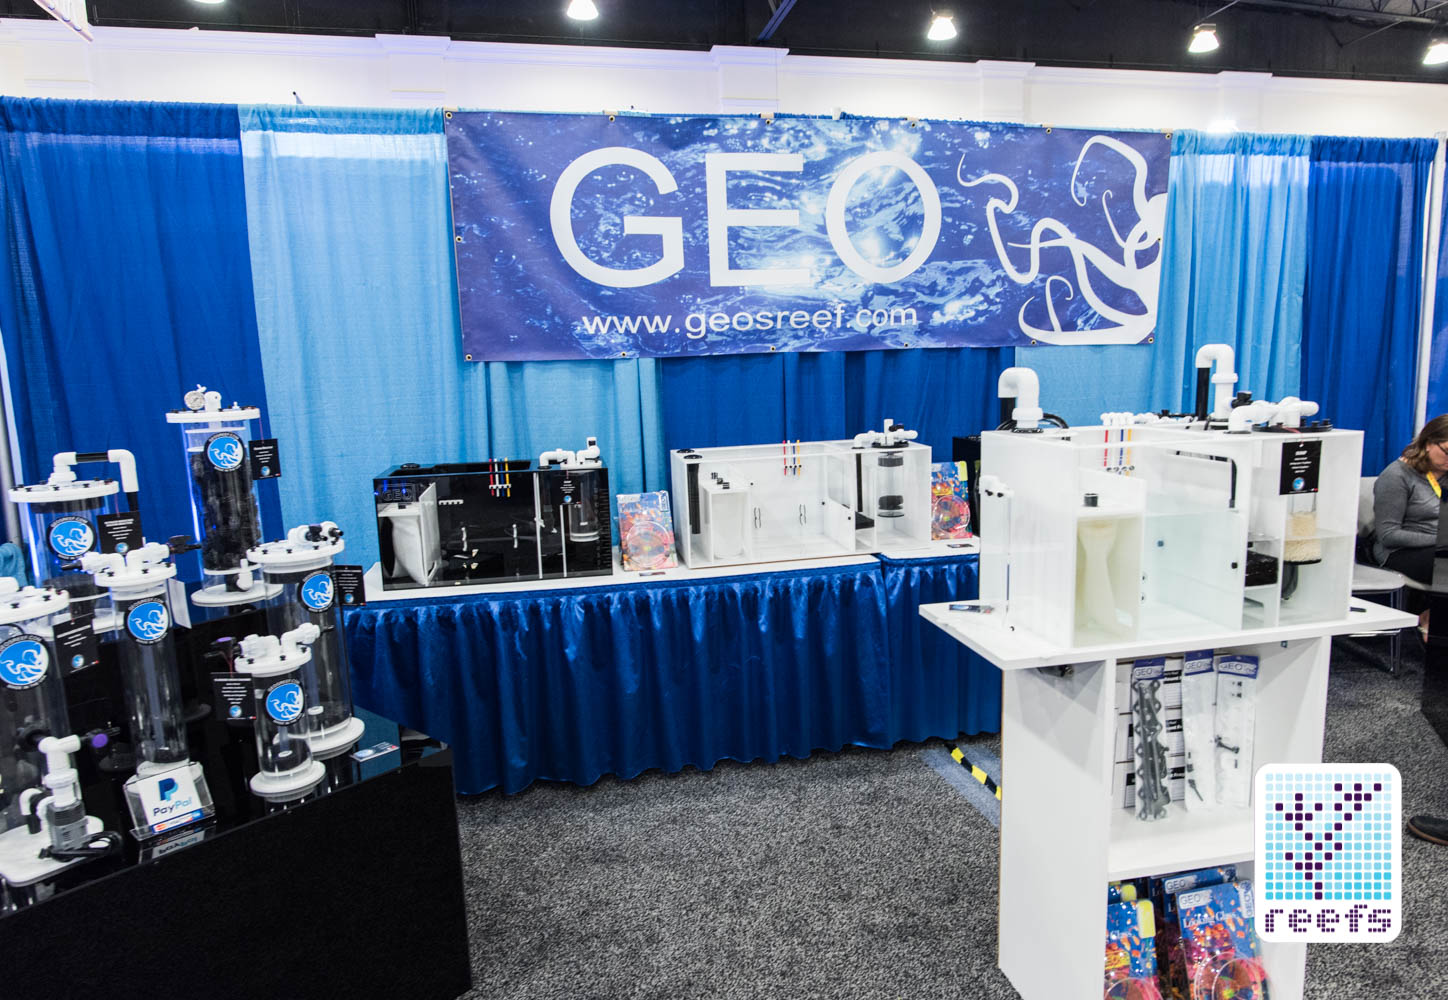 GEO's Reef booth at MACNA 2016 in San Diego